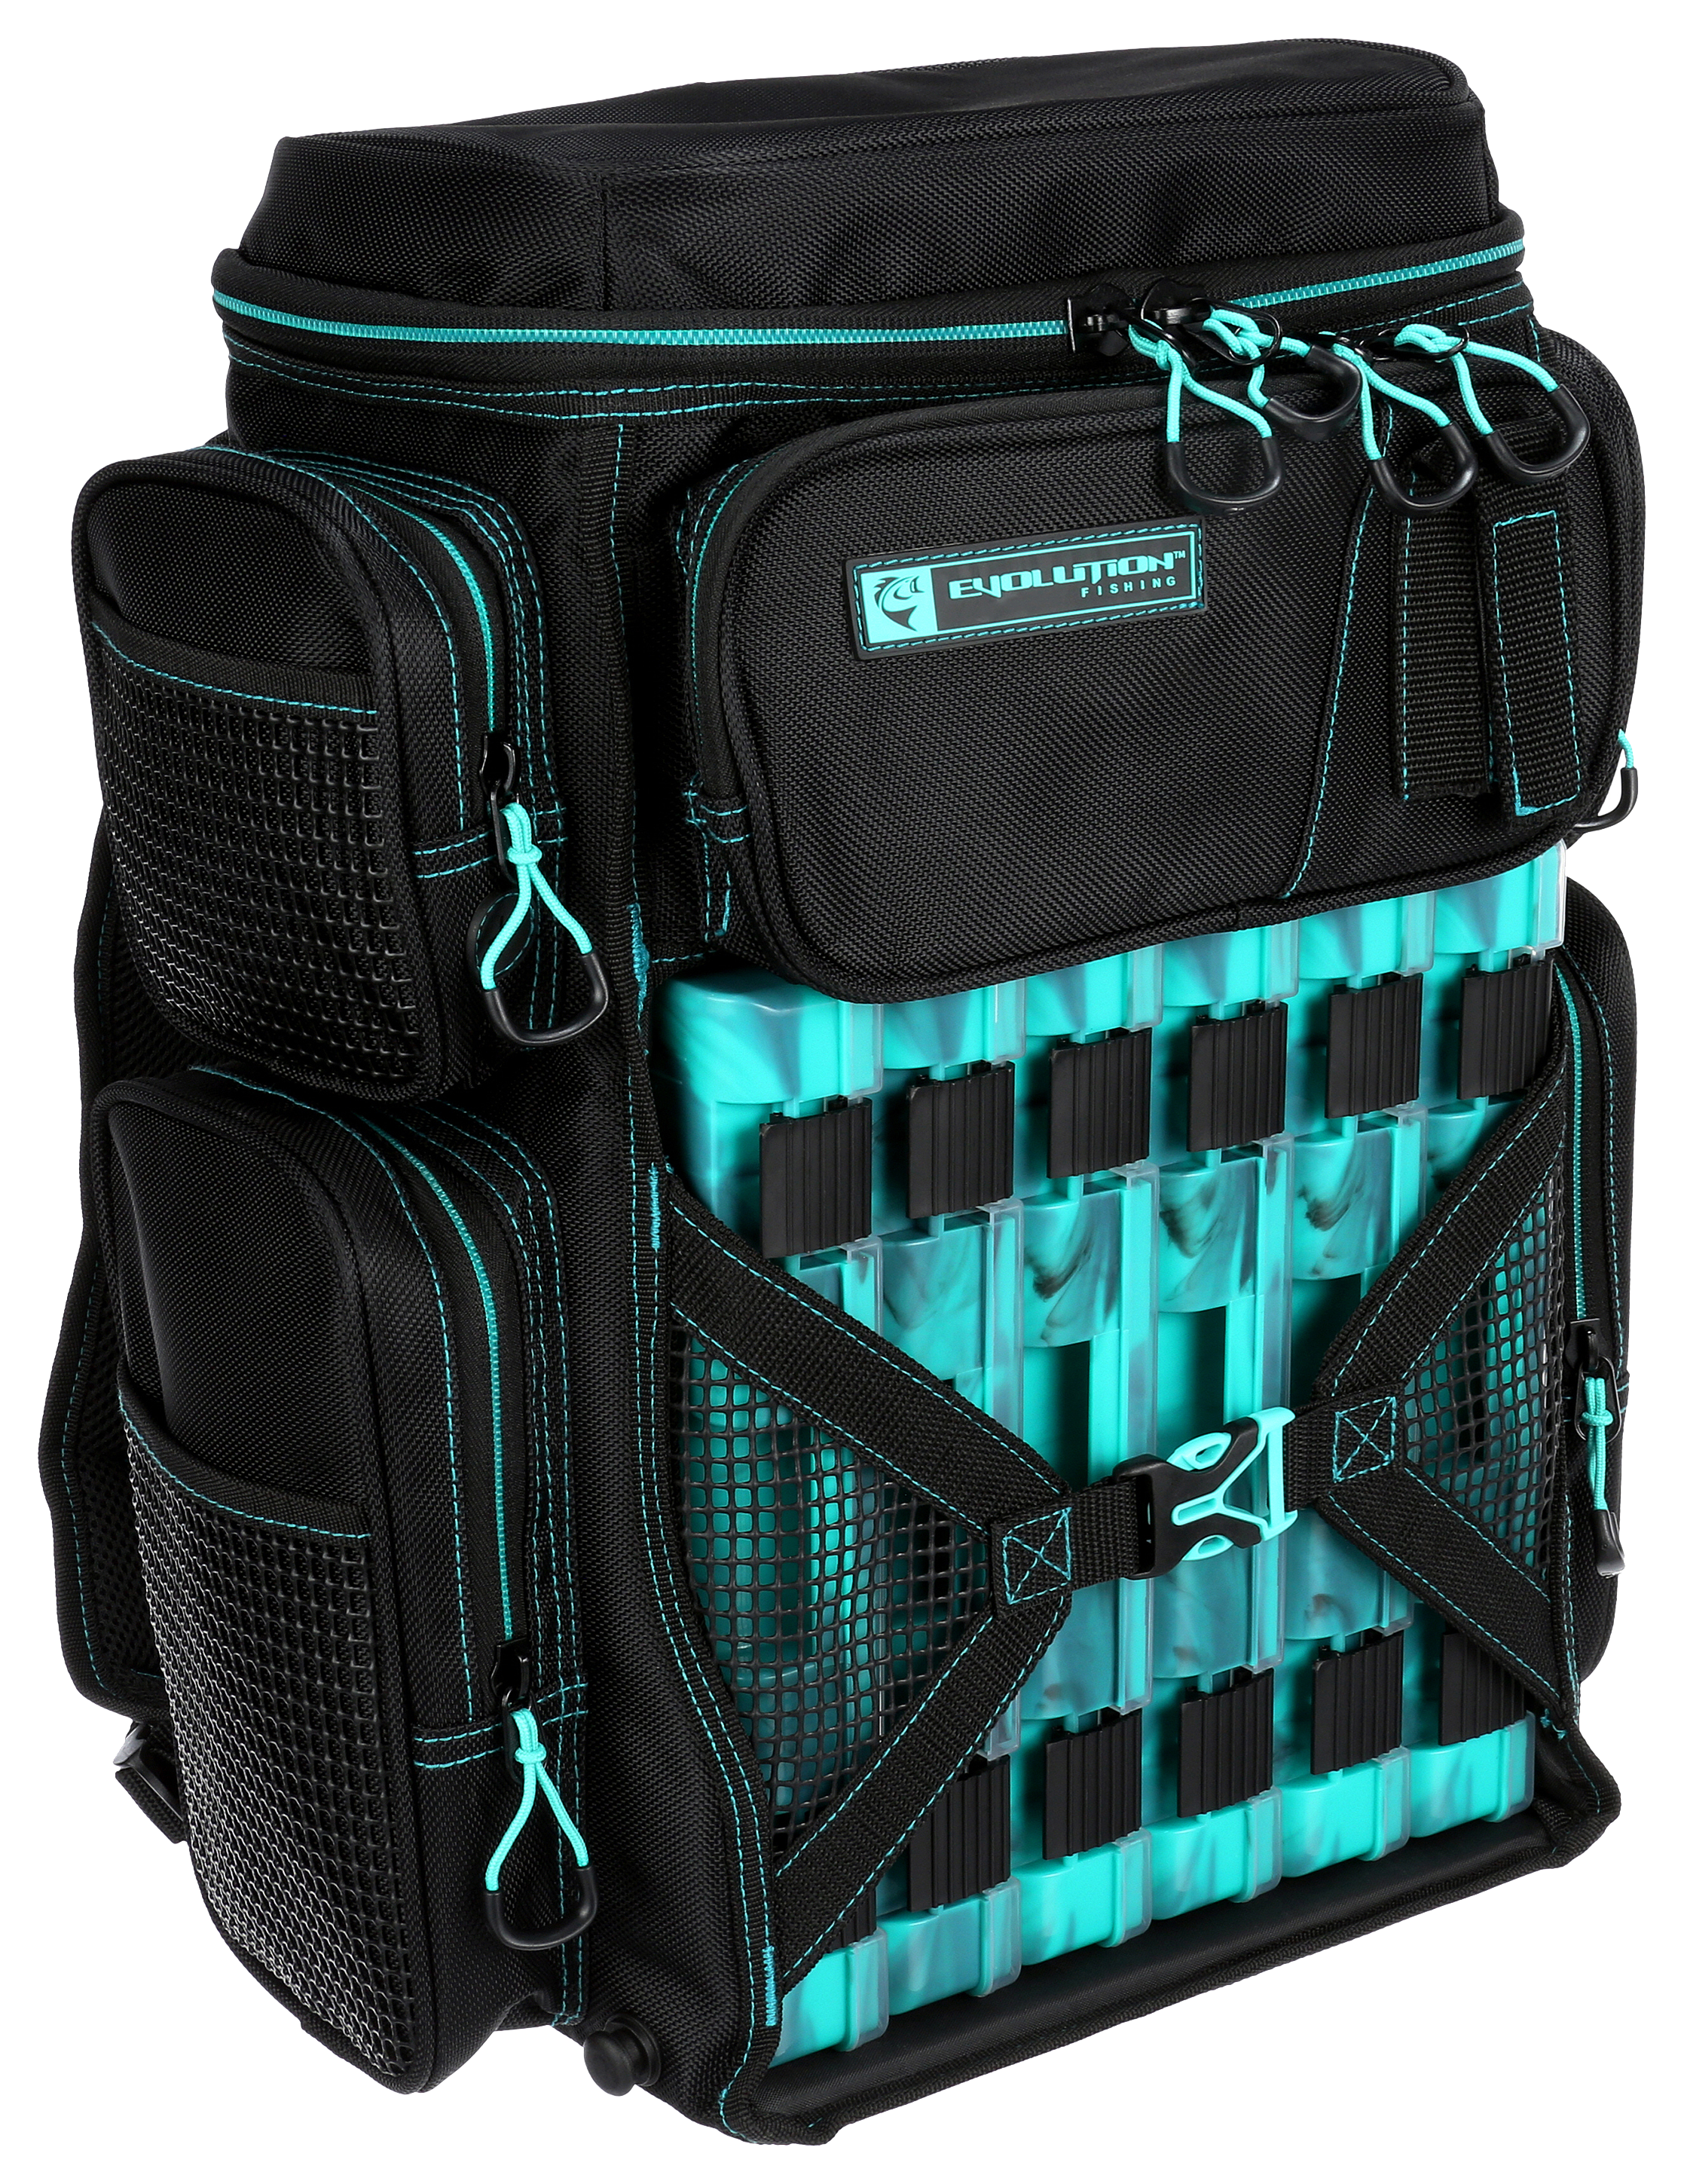 Blue/Black 3600 Drift Tackle Backpack by Evolution Outdoor at Fleet Farm